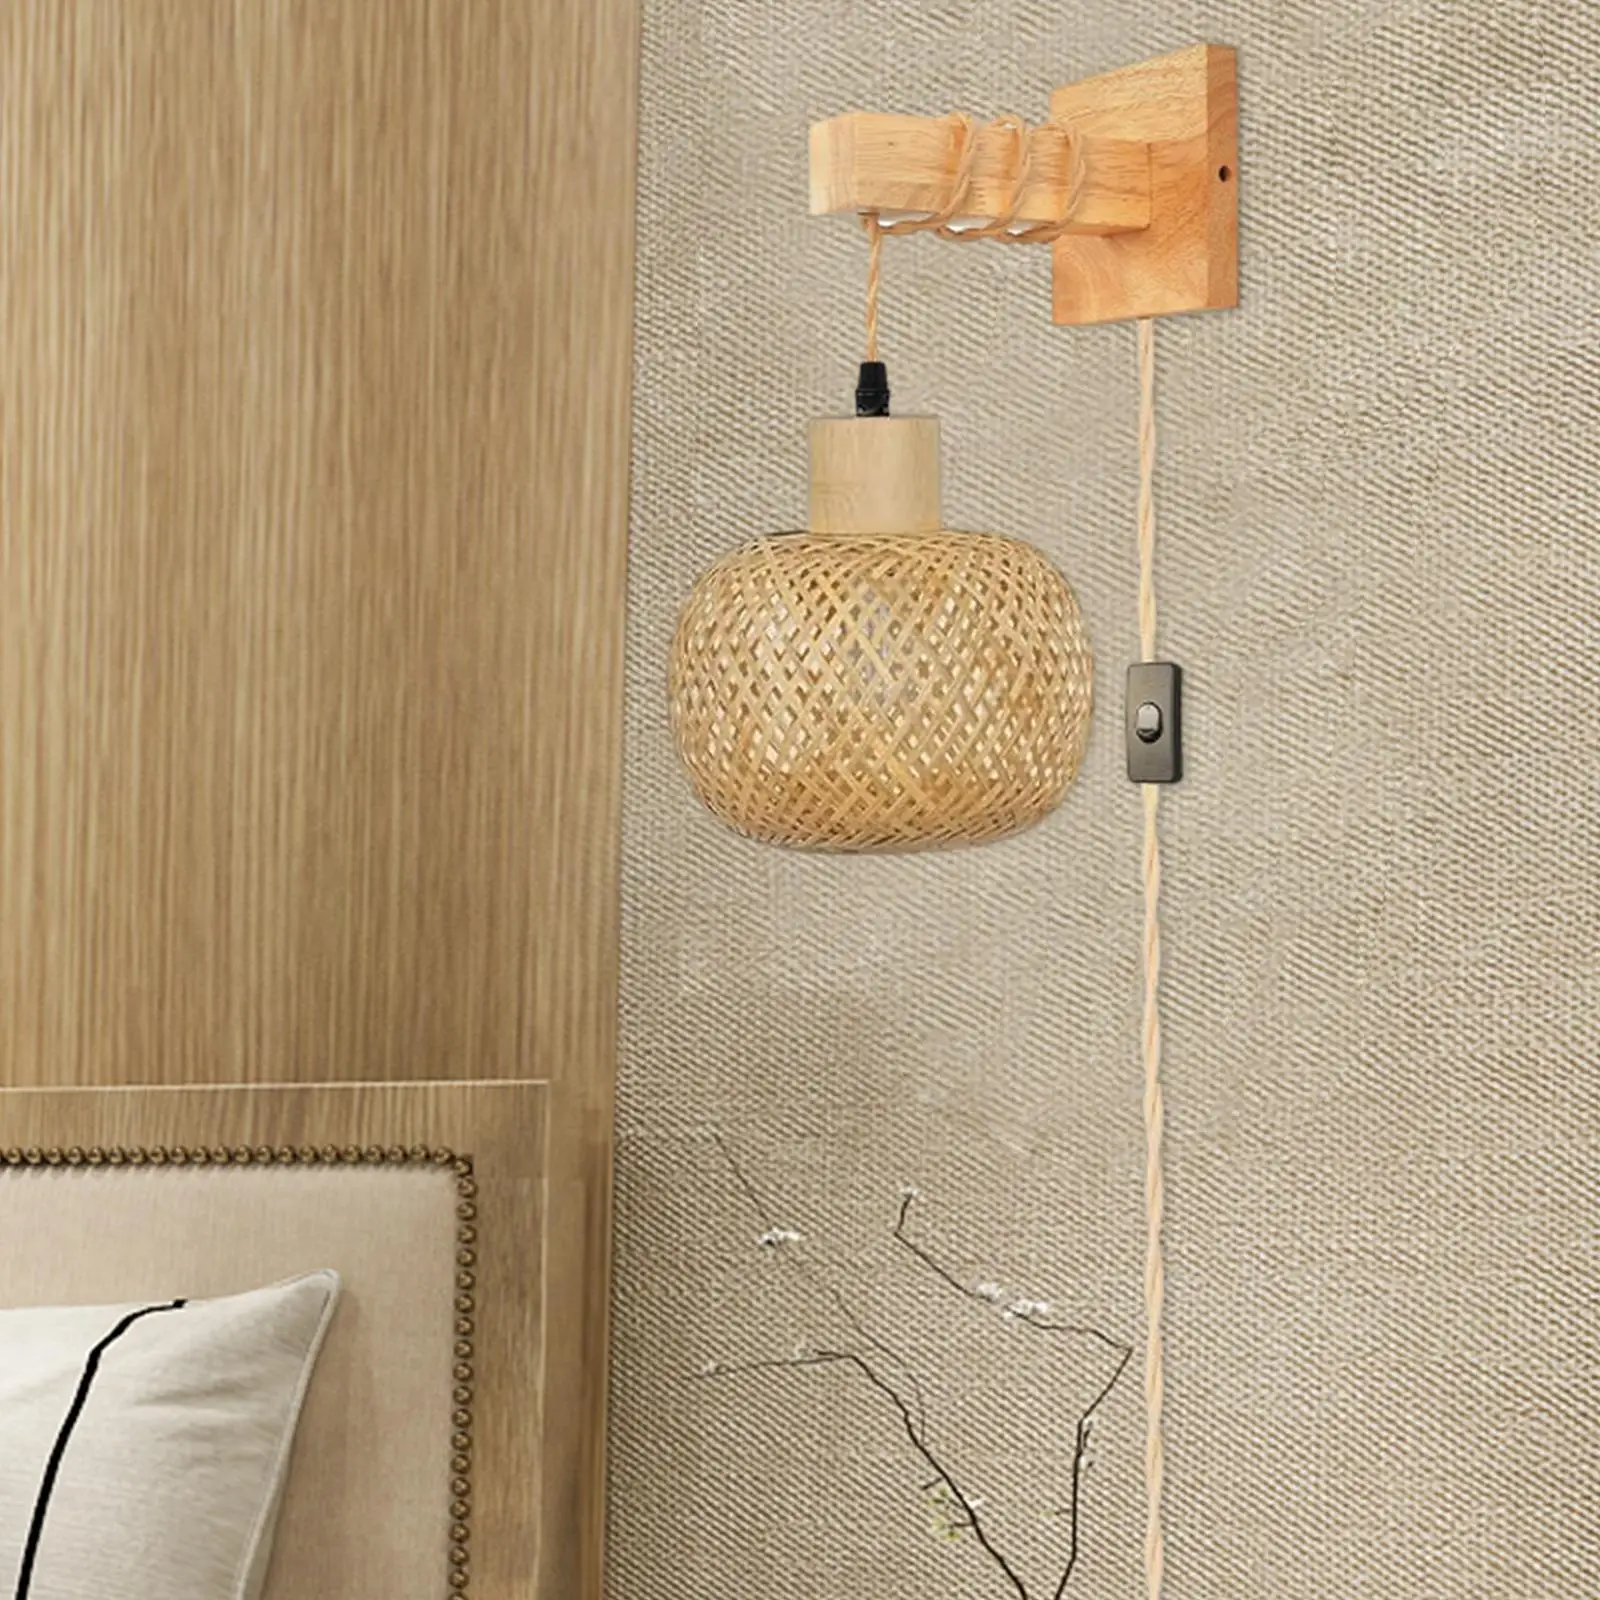 Wall Sconce Bedside Light Fixture Wall Mount Sconce Farmhouse Hanging Lamp for Kitchen Reading Bathroom Bedroom Home